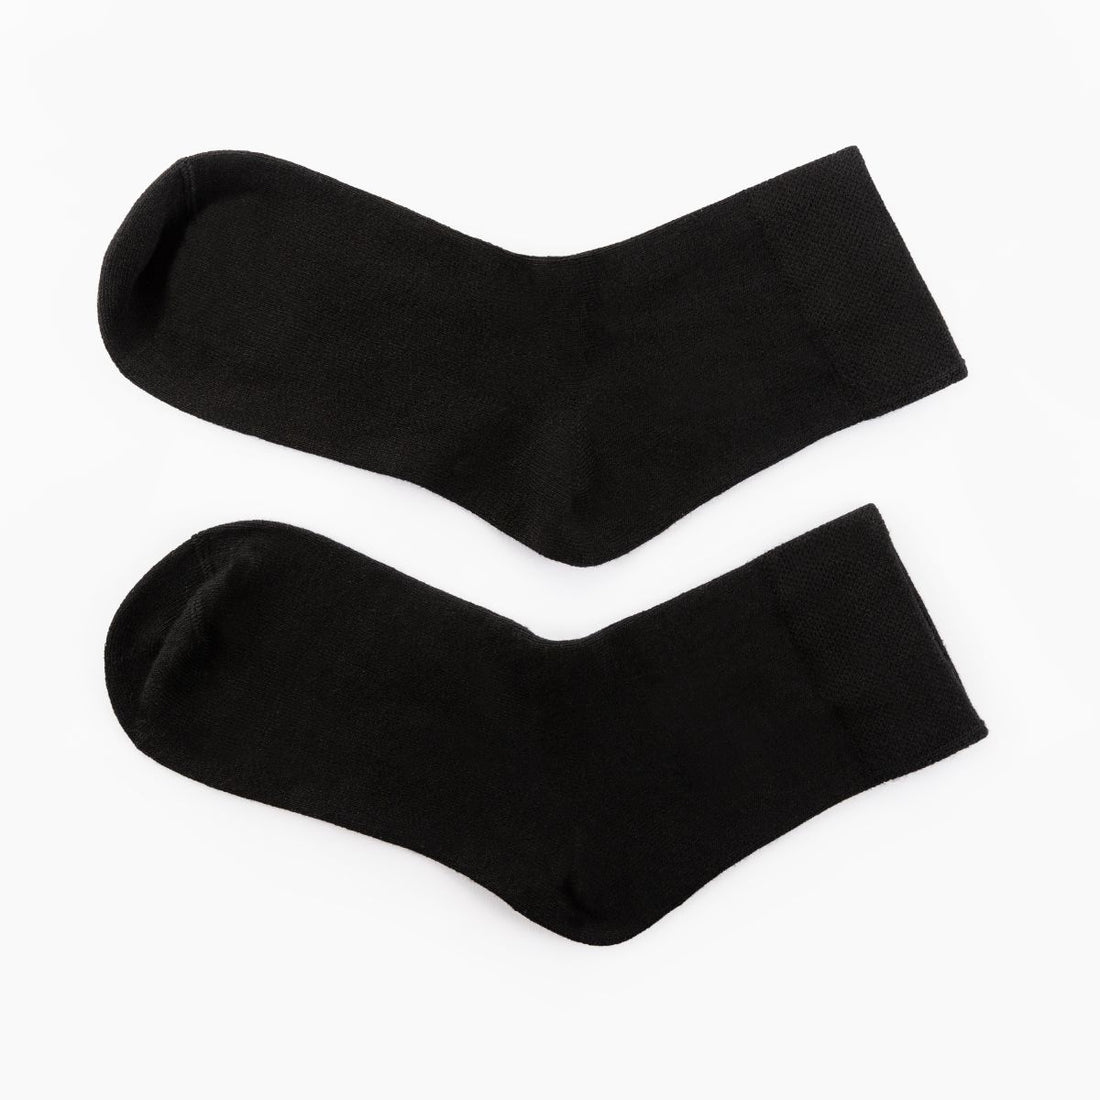 Neutral Collection Ankle Length Bamboo Socks